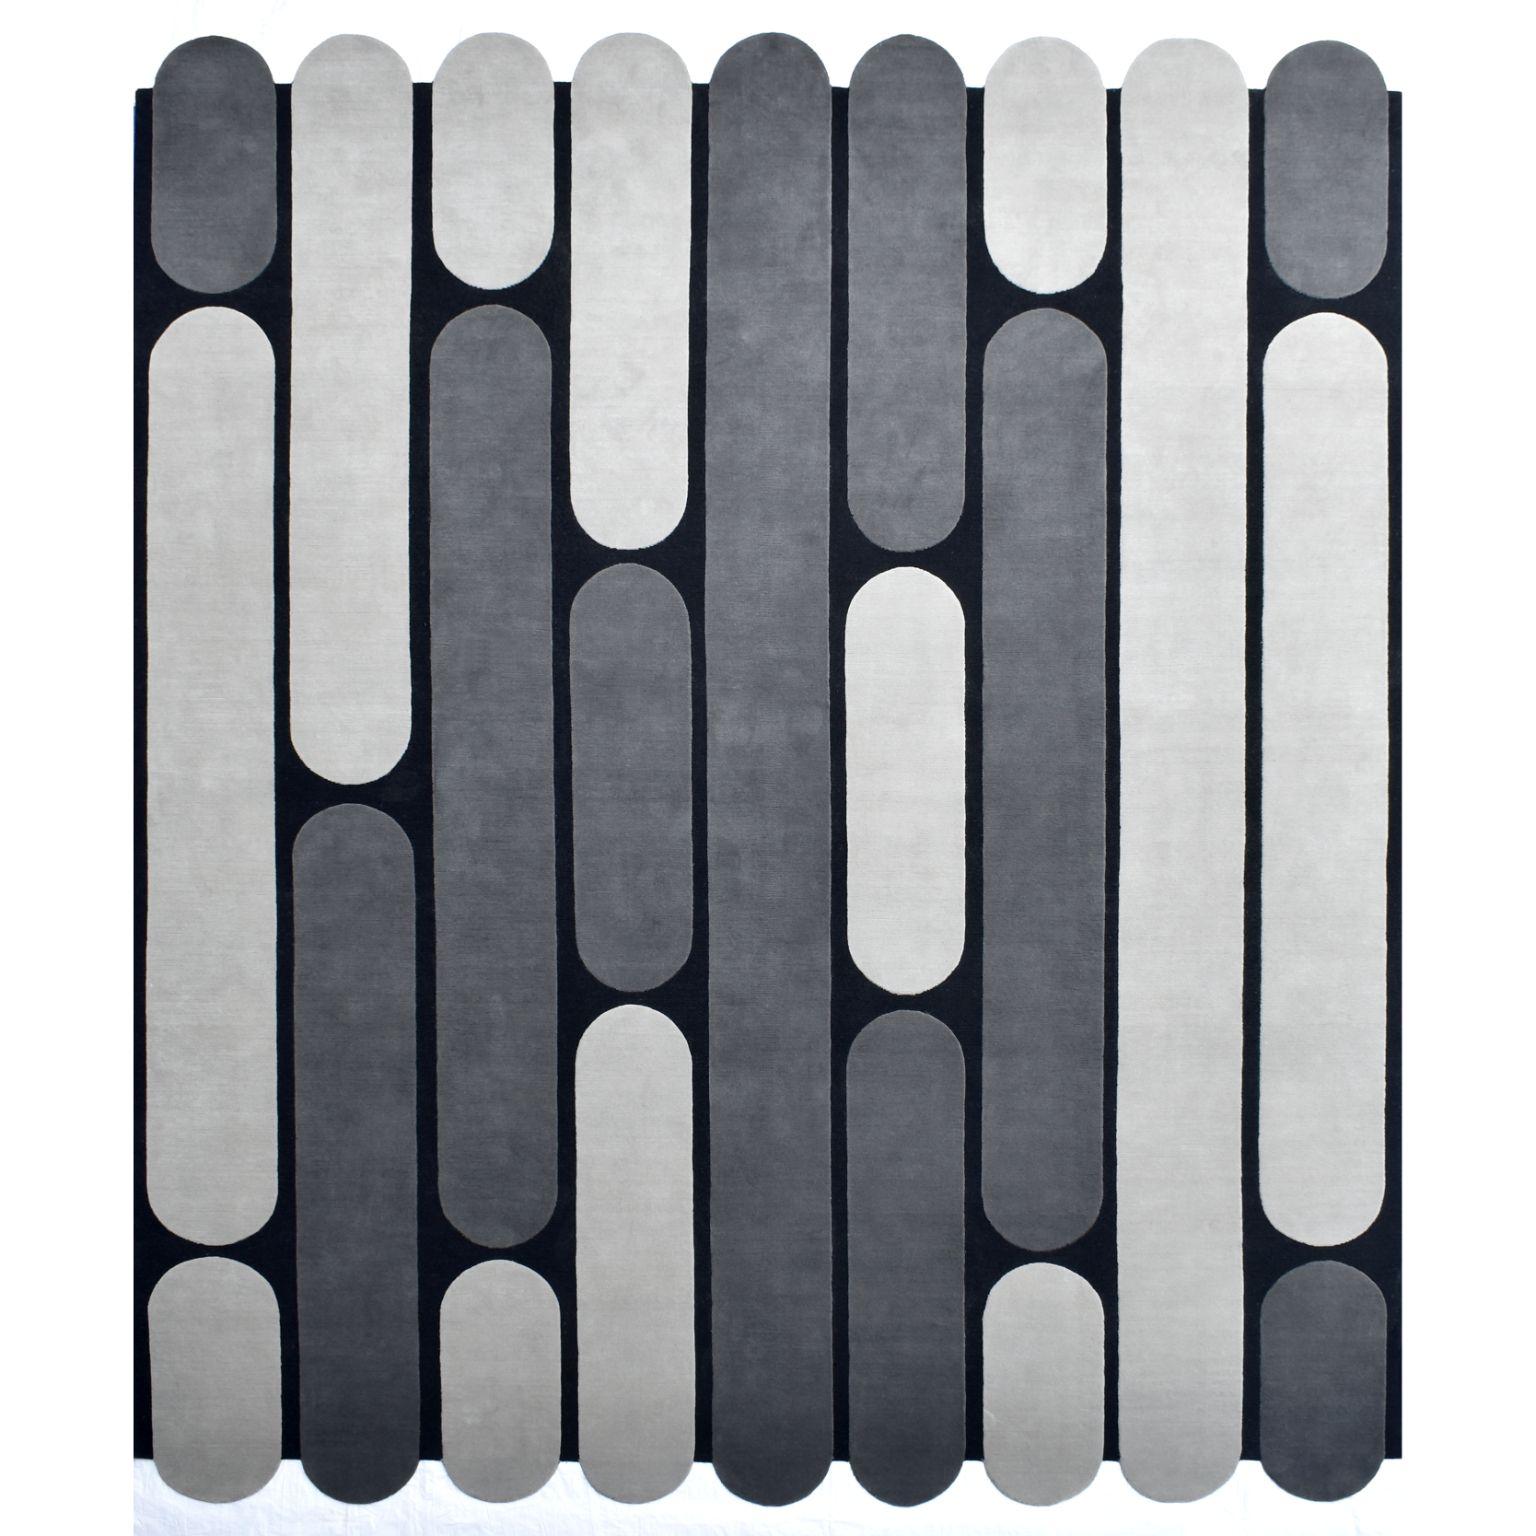 Scallop large rug by Art & Loom
Dimensions: D 304.8 x H 426.7 cm
Materials: 100% New Zealand wool—loop & cut
Quality (Knots per Inch): 80
Also available in different dimensions.

Samantha Gallacher has always had a keen eye for aesthetics,